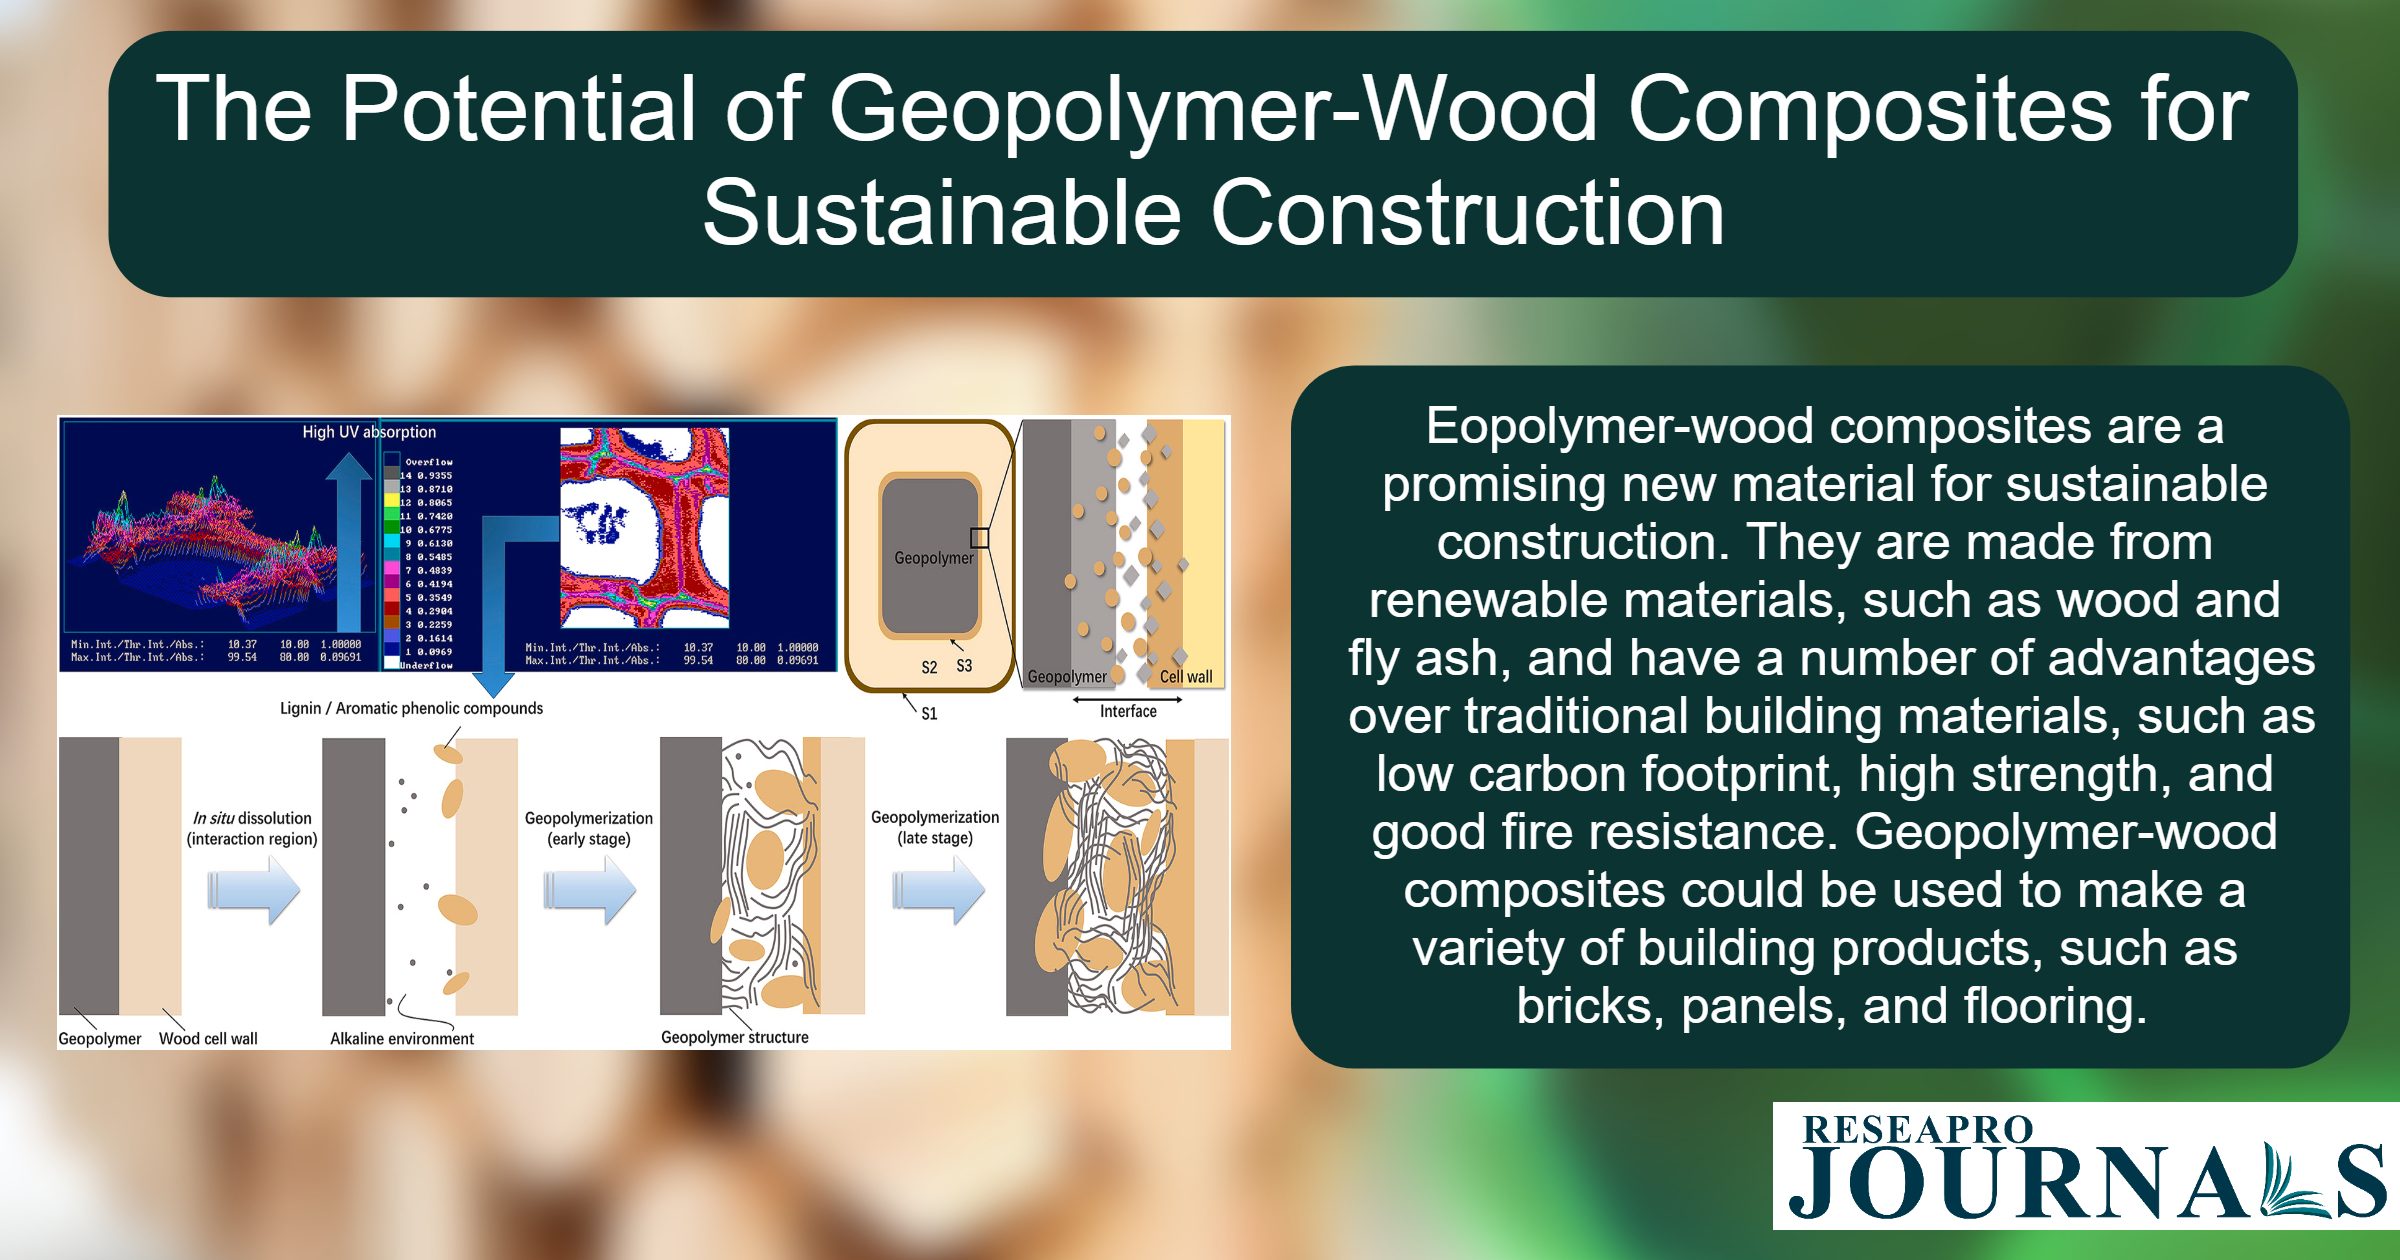 The potential of geopolymer-wood composites for sustainable constructions